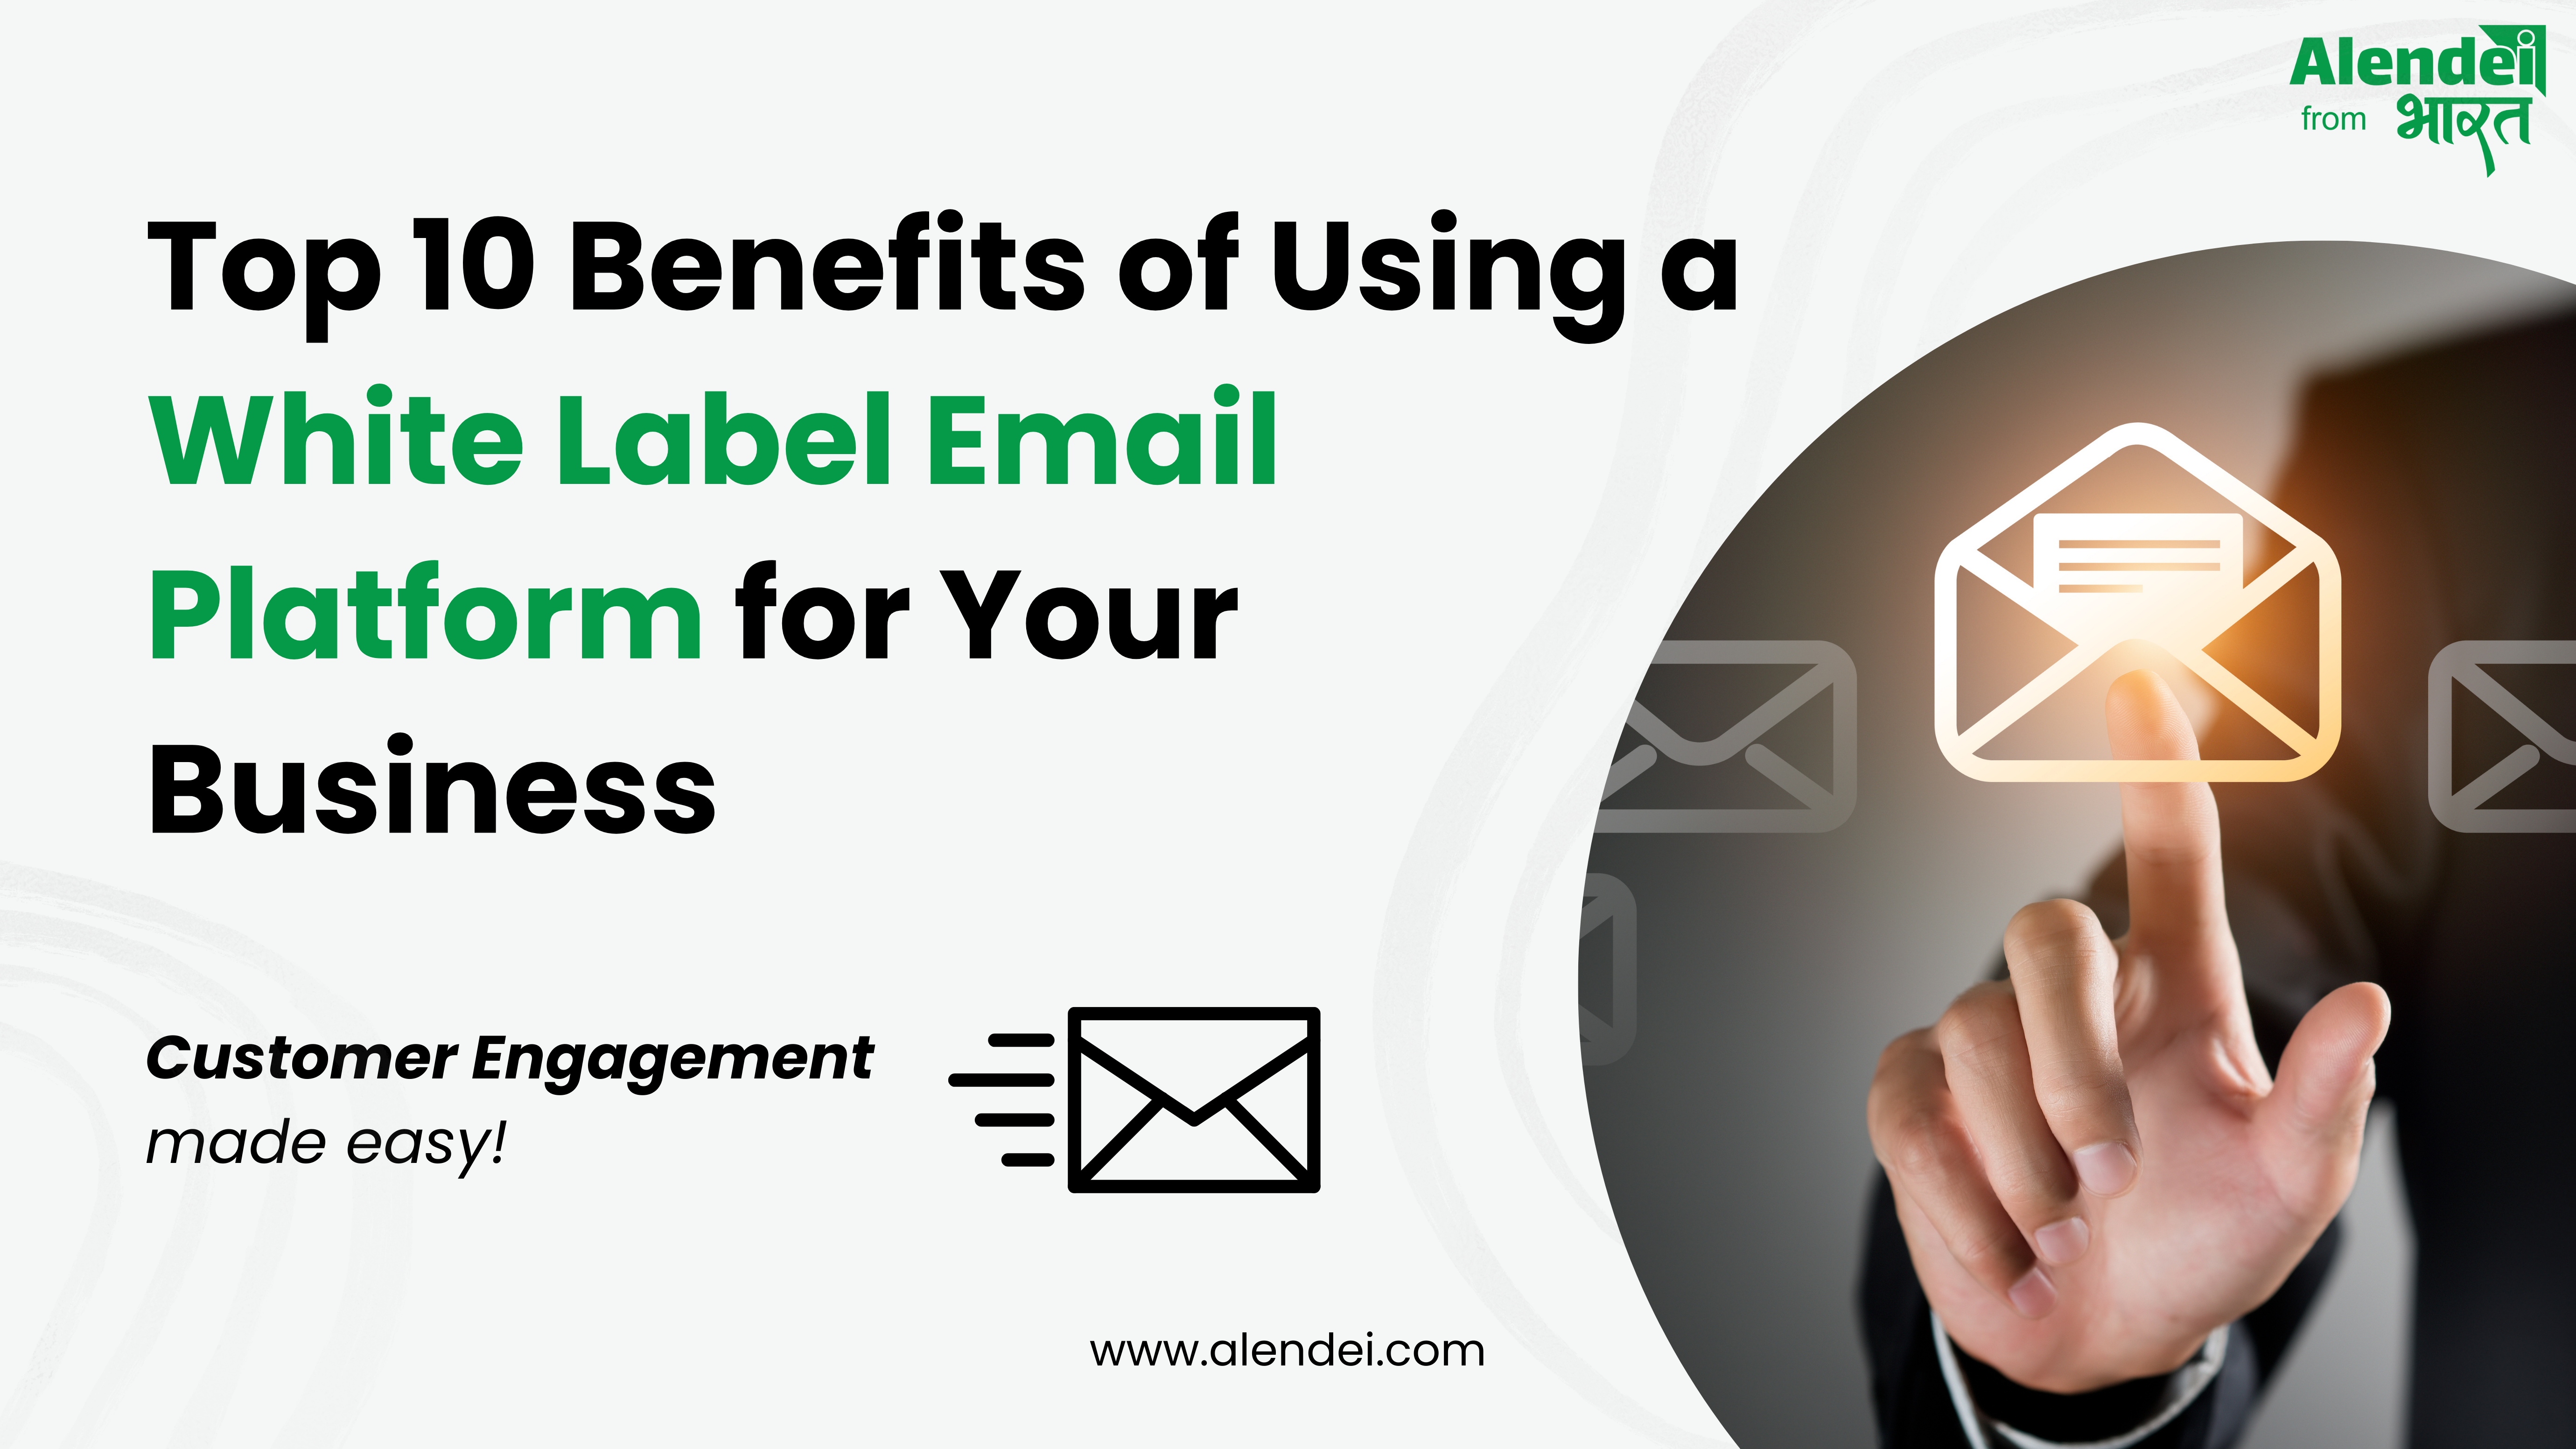 Top 10 Incredible Benefits of Using a White Label Email Platform for Your Business